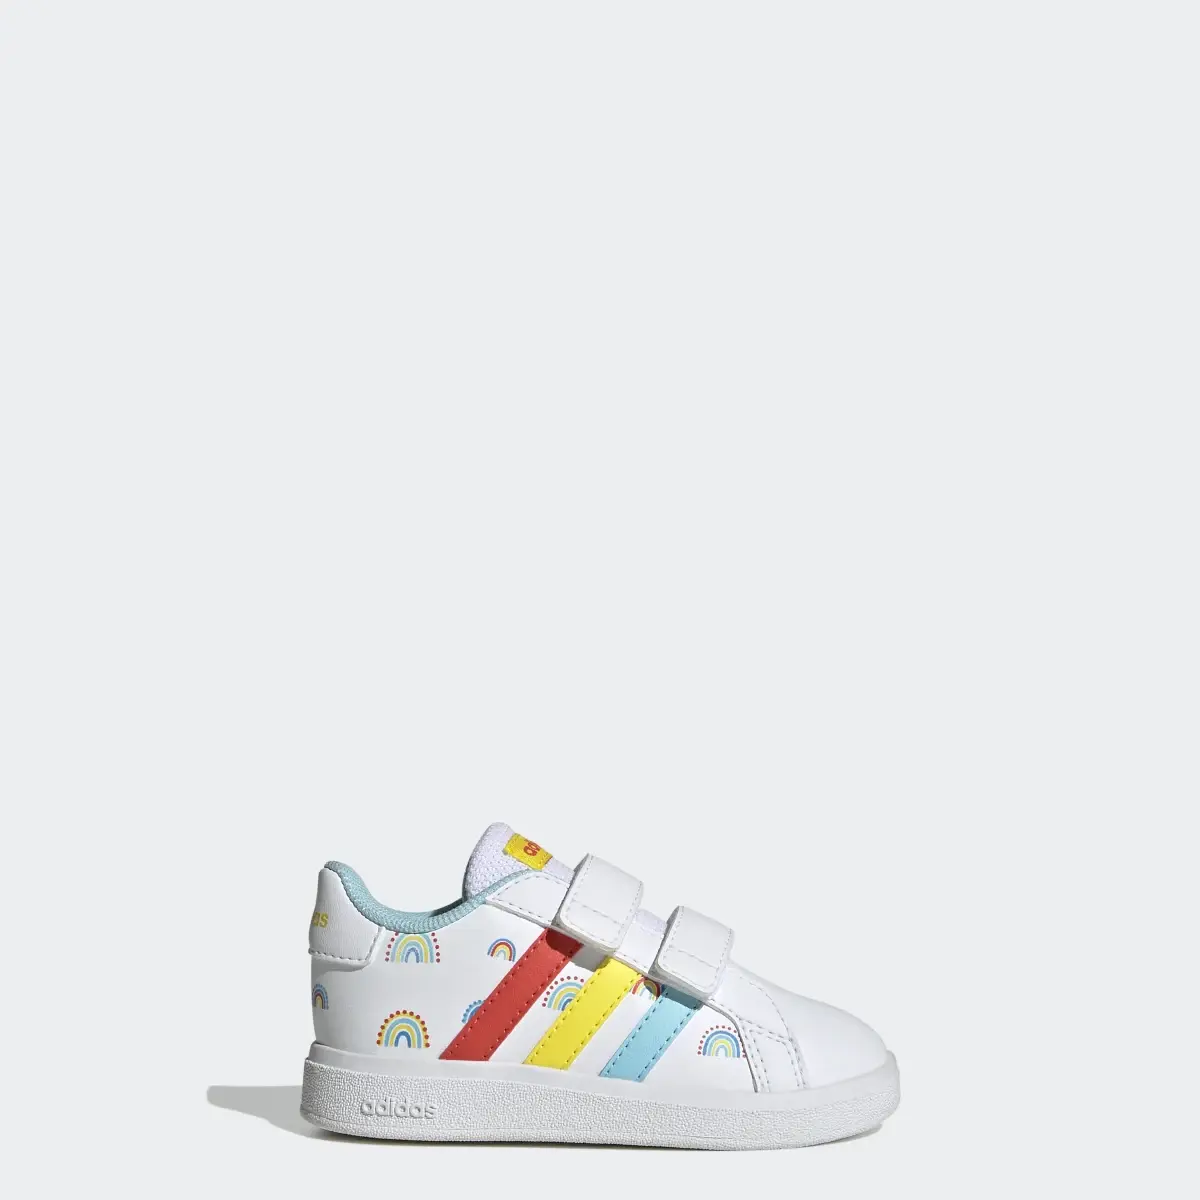 Adidas Grand Court Two-Strap Hook-and-Loop Shoes. 1